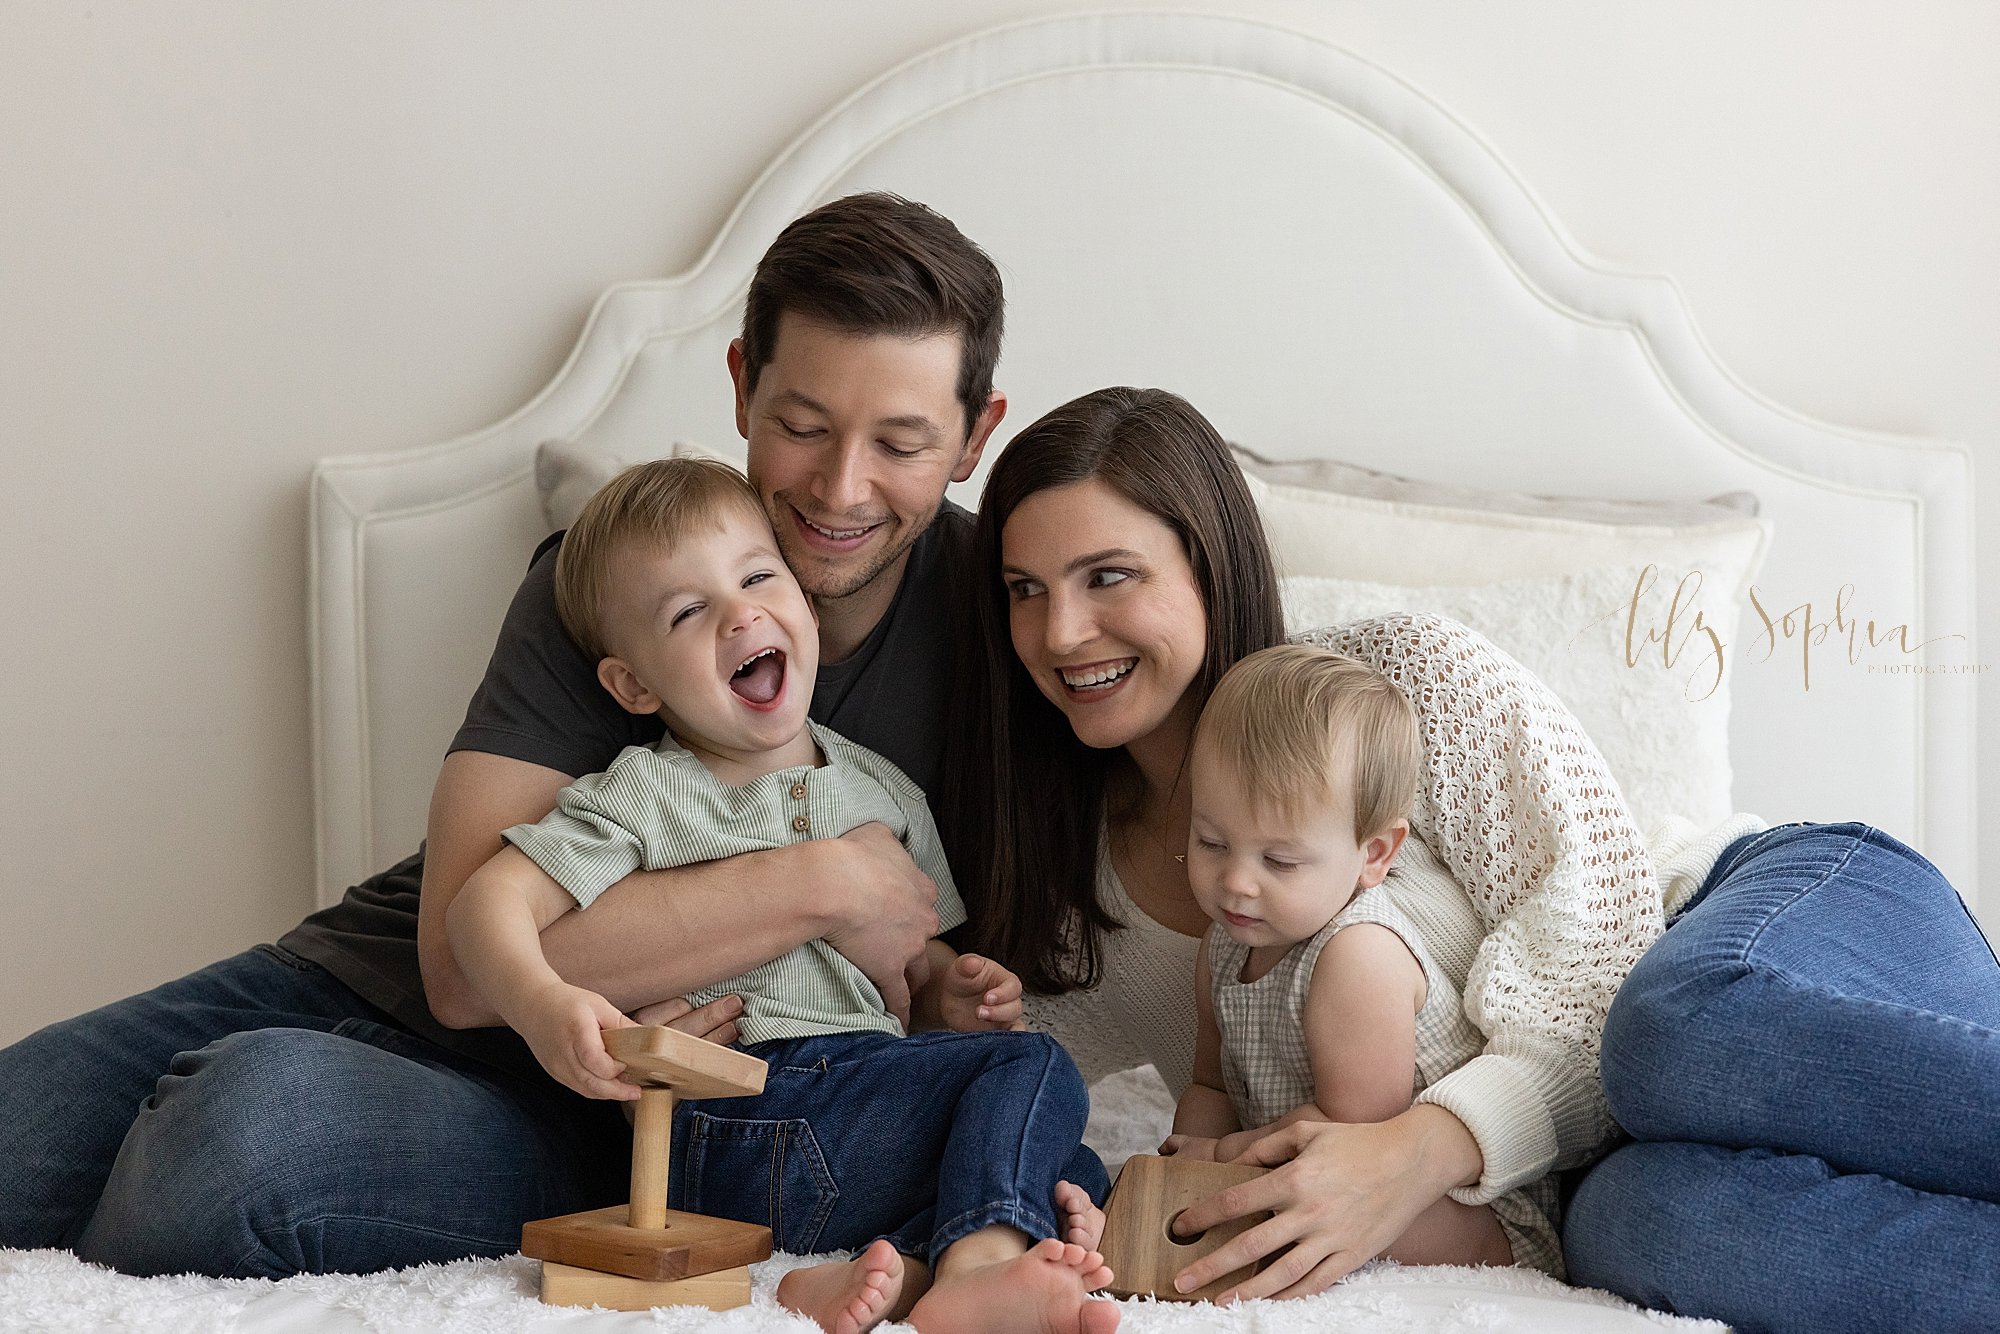  Fun family photo of a father holding his laughing toddler son in front of him on a bed as the son plays with a wooden stacking toy and his wife leans on her right arm while lying on the bed next to them with their one year old son in front of her ta